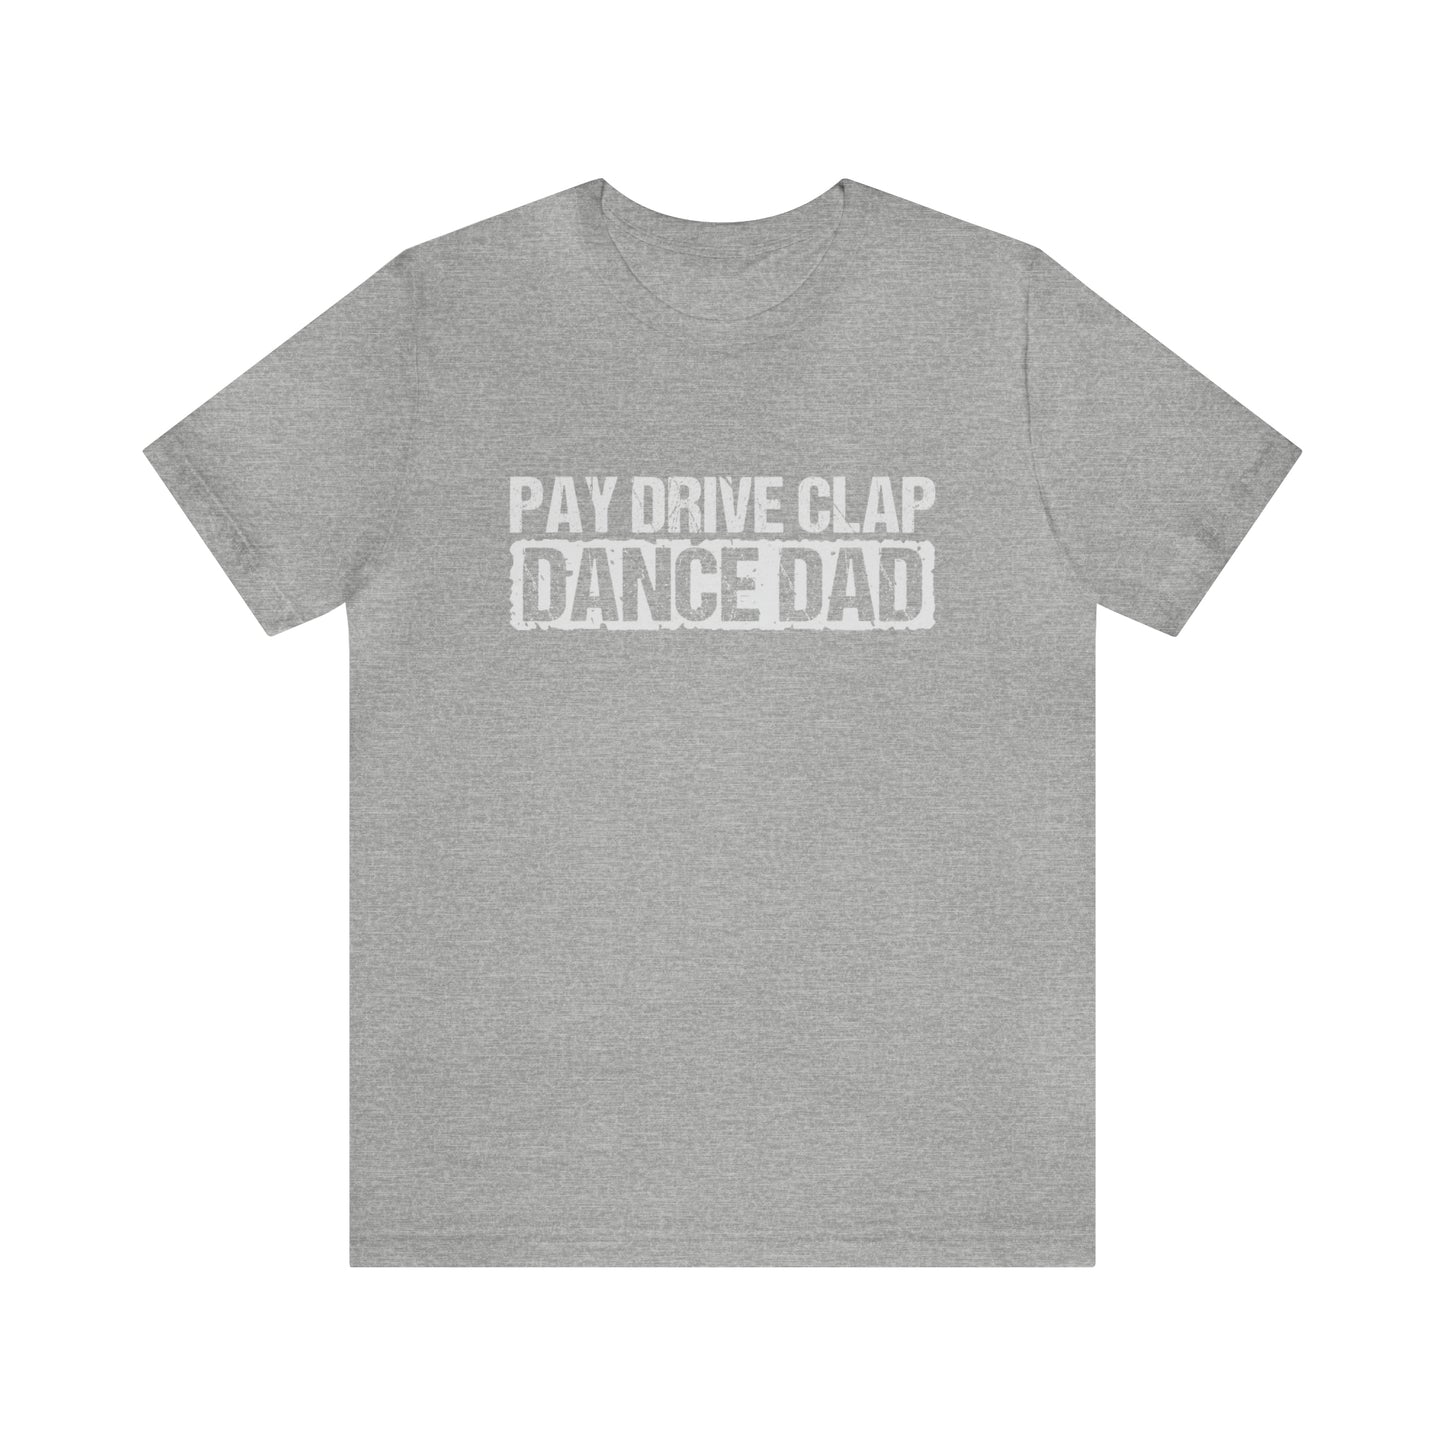 DANCE DAD pay drive clap Short Sleeve Unisex Adult Tee